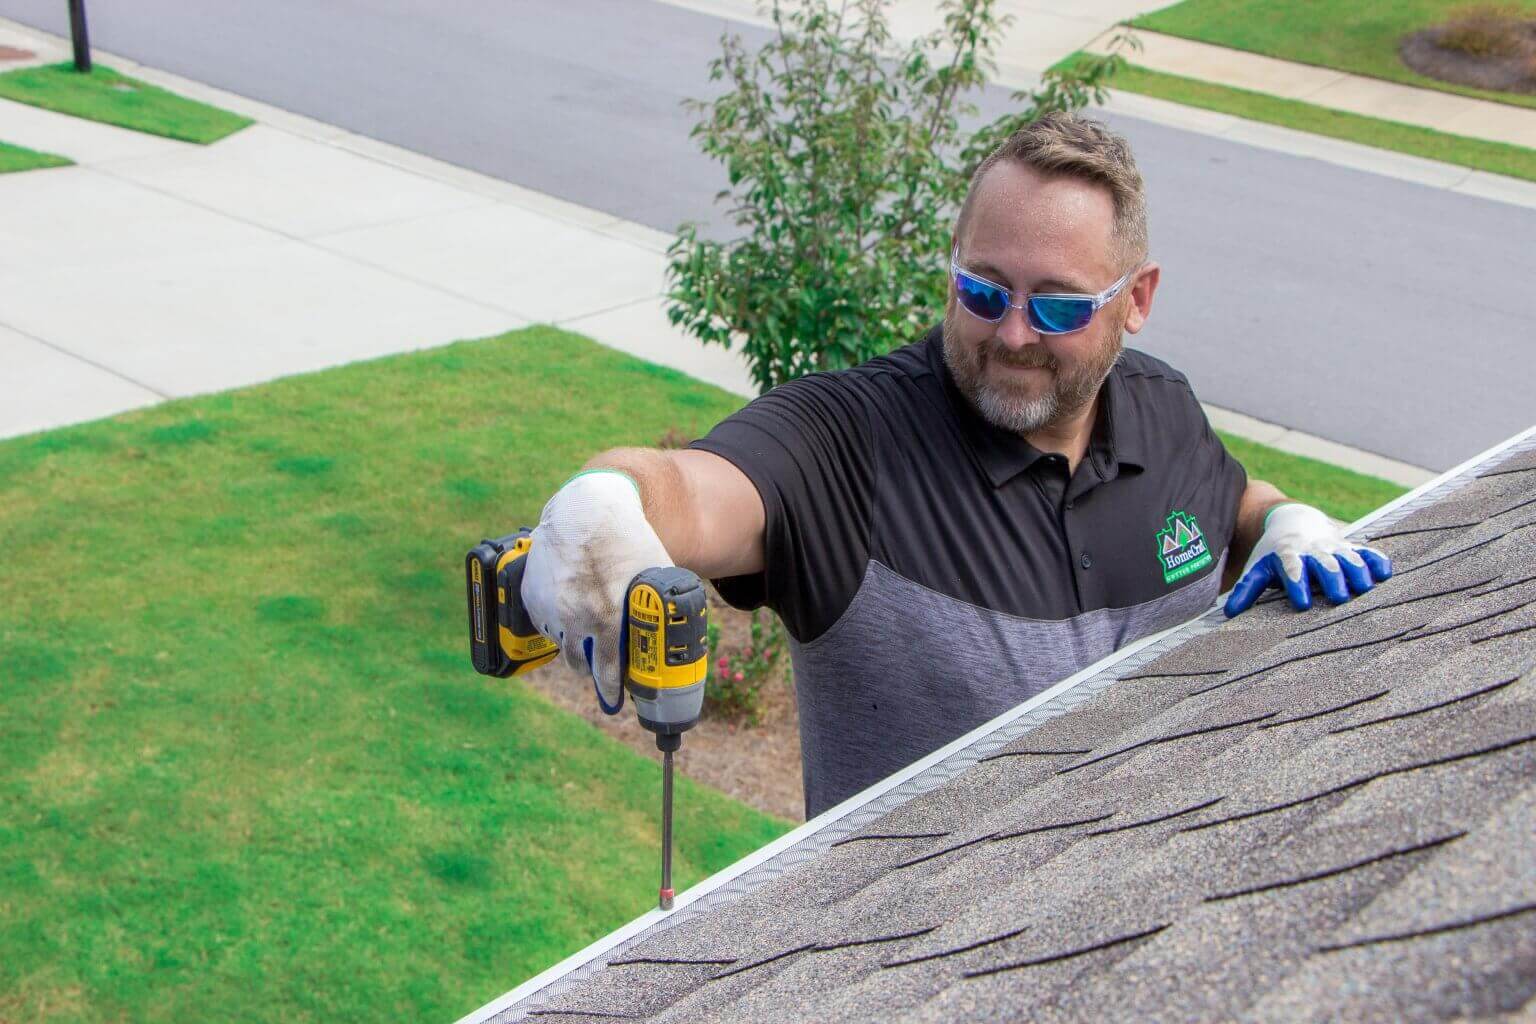 The Best Gutter Guards in College Grove, TN